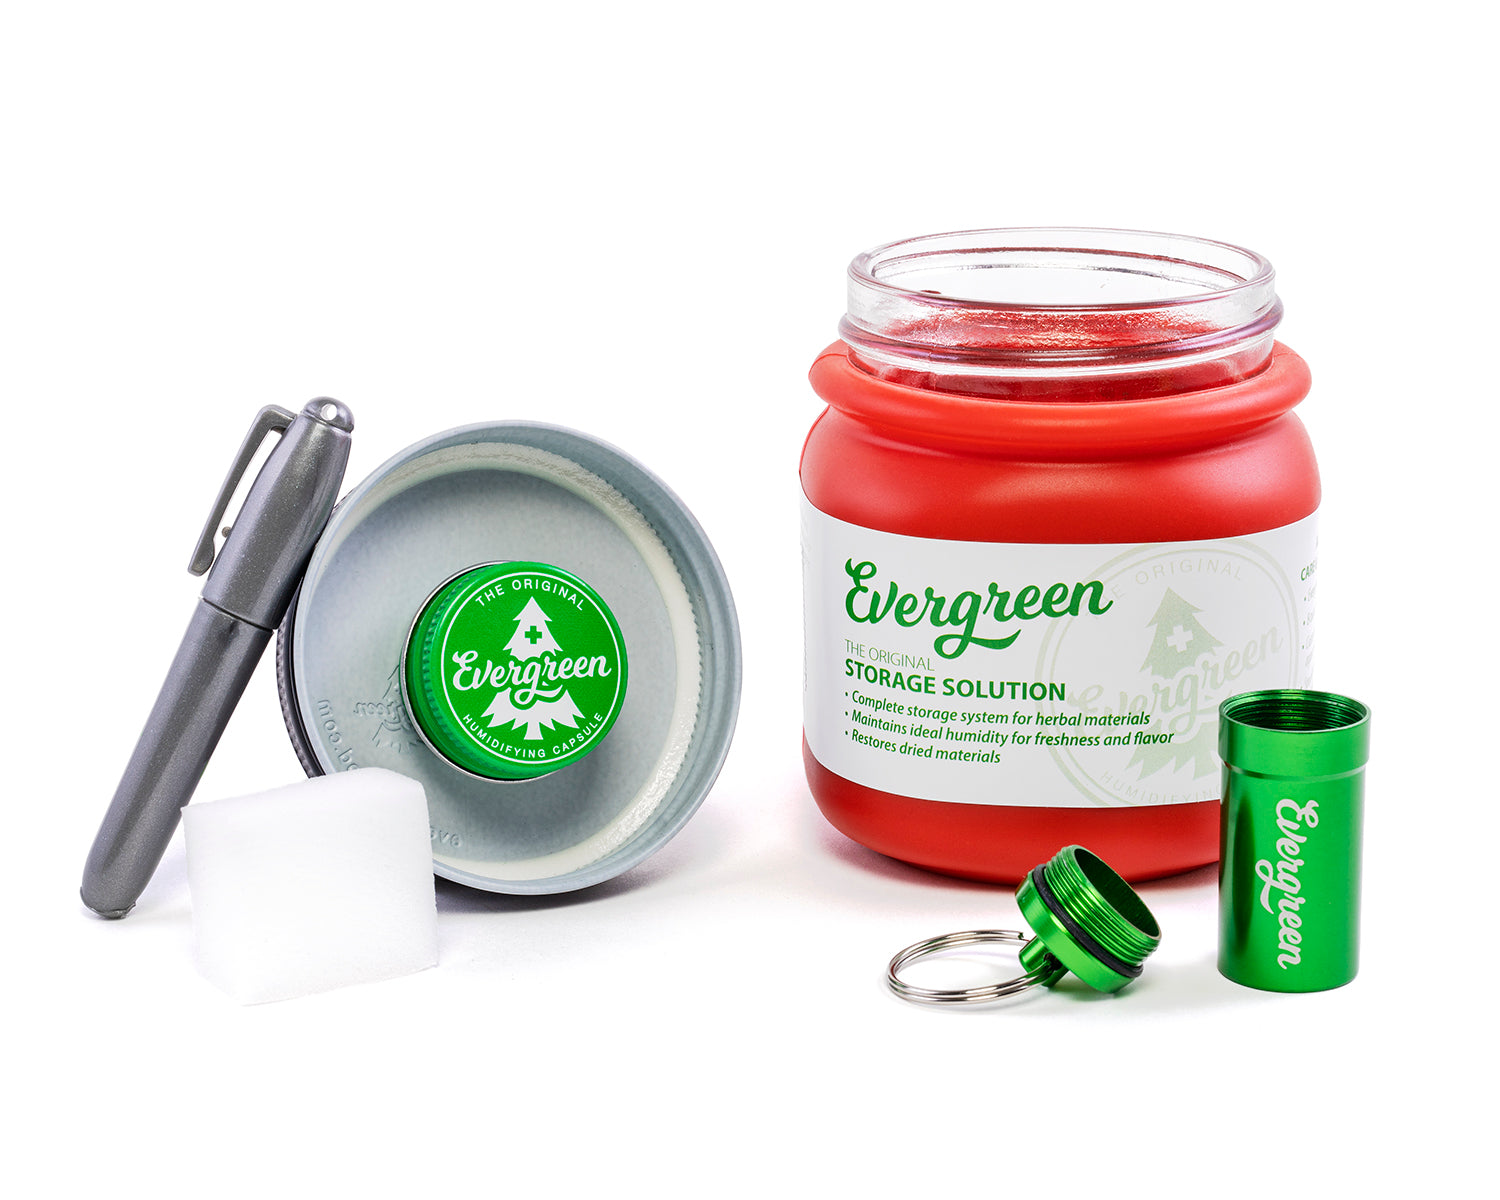 Evergreen Storage Solution open showing contents, red